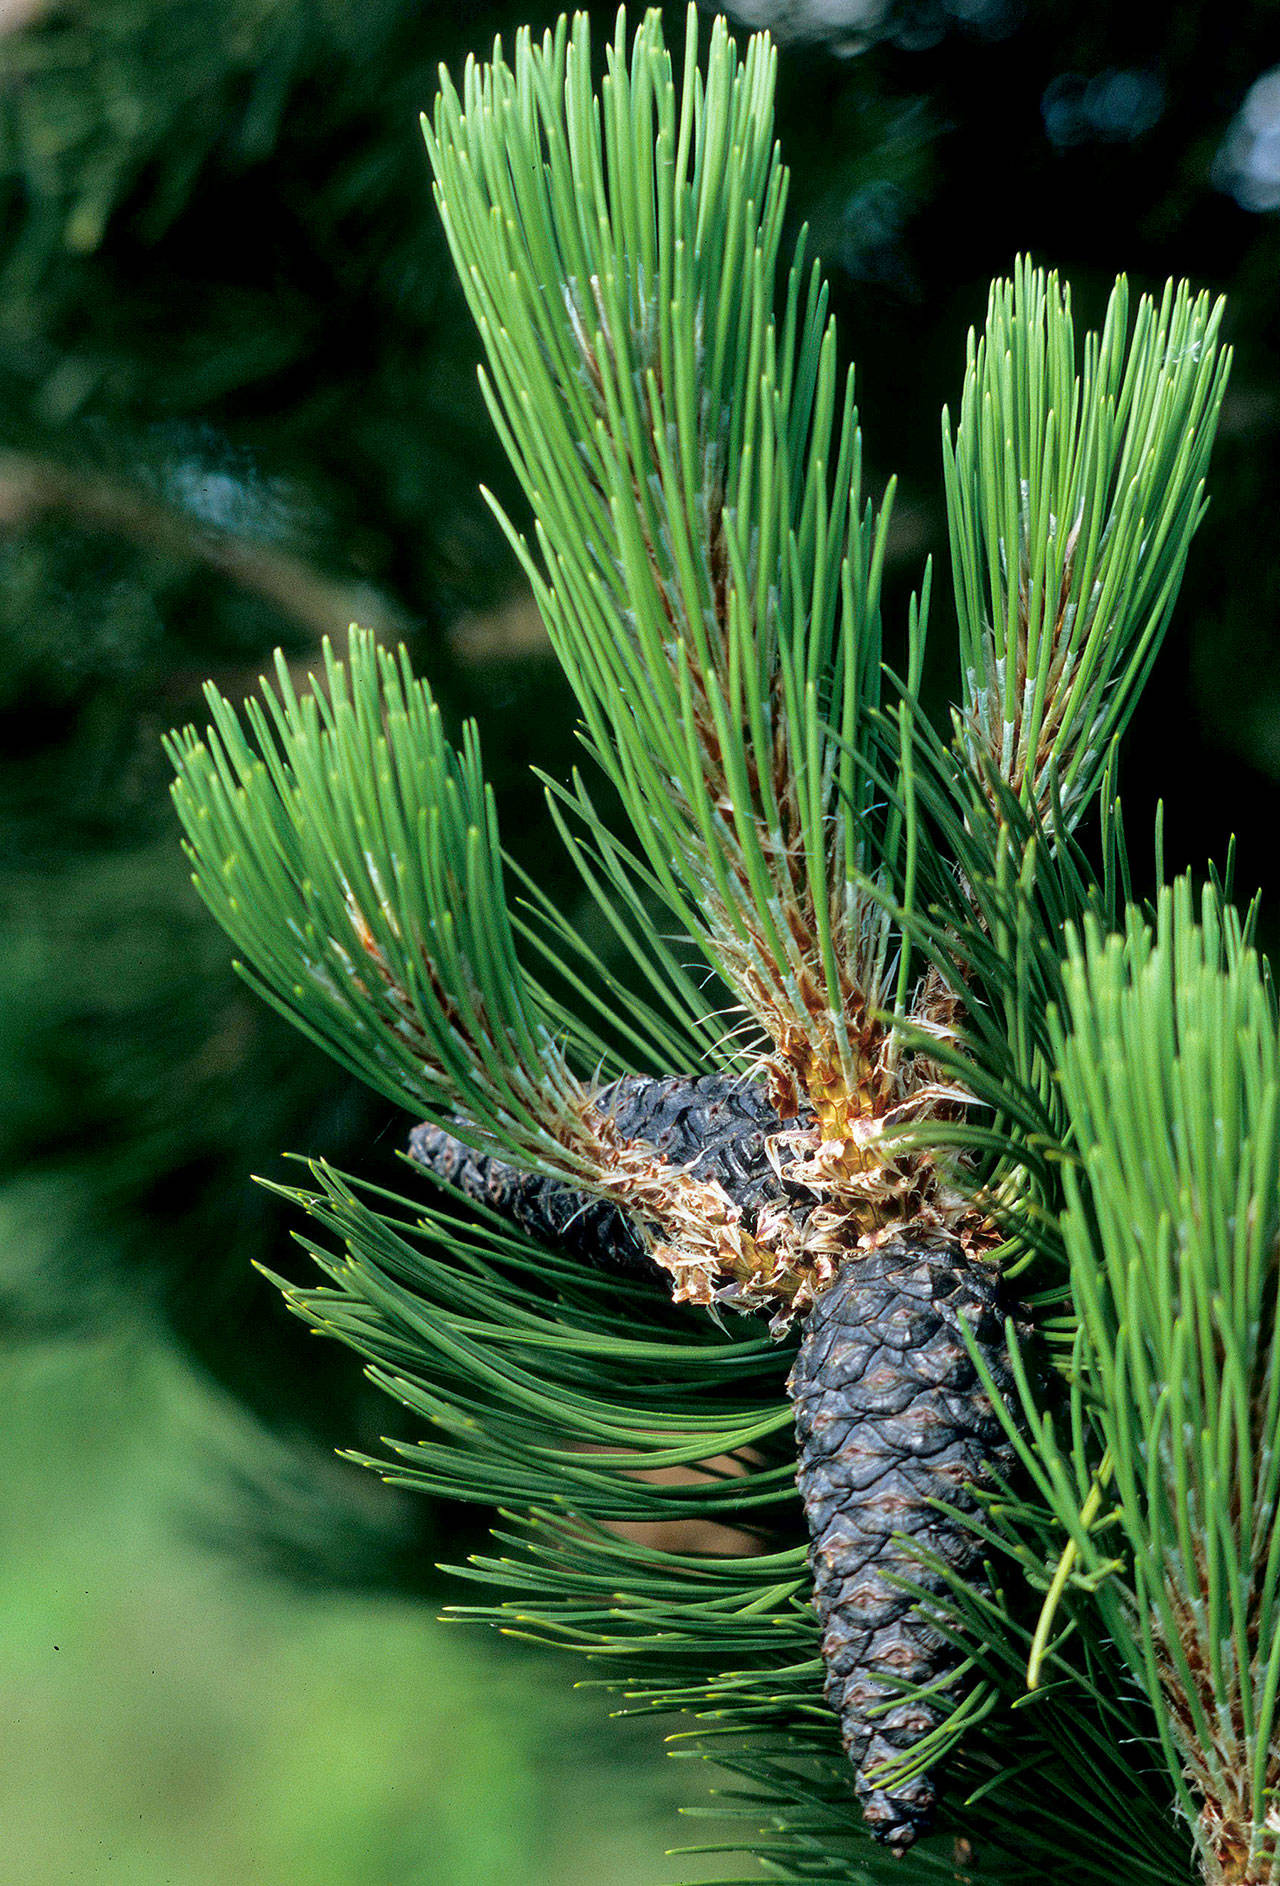 With its stately form and upright needles, the Bosnian pine adds an aristocratic air to the garden. (Richie Steffen)